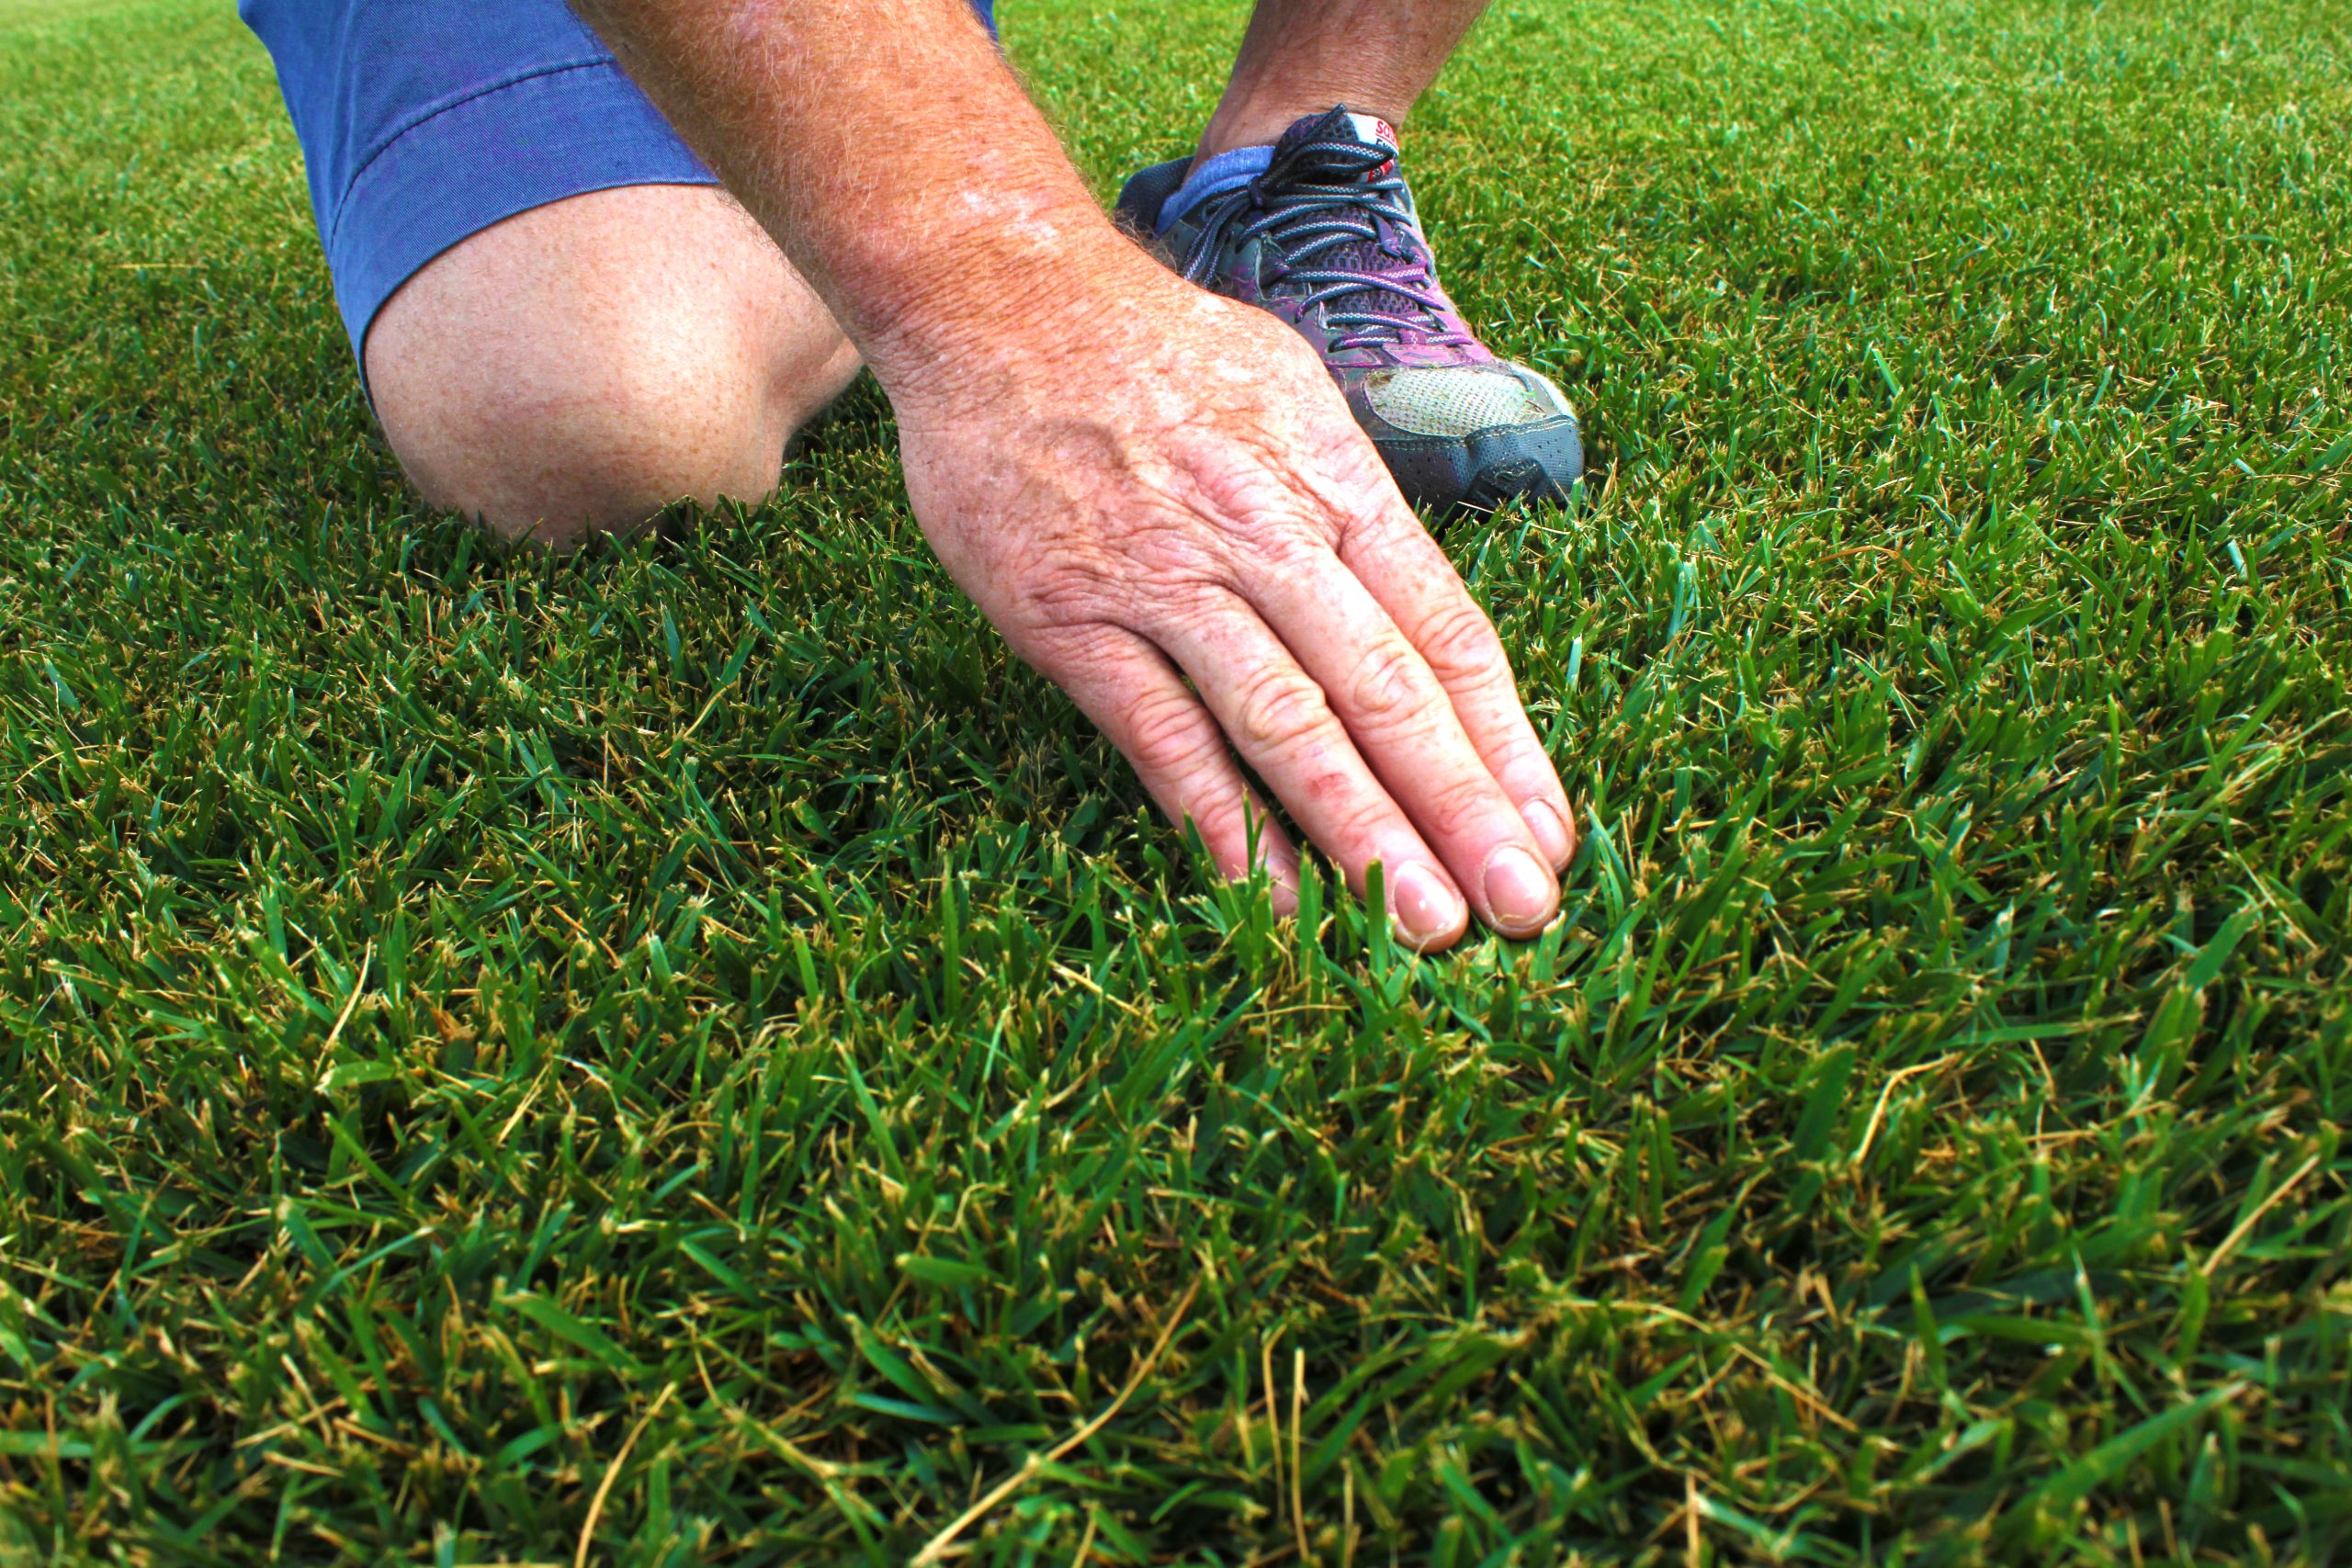 Turf Certification – What is it and Why is it Important?